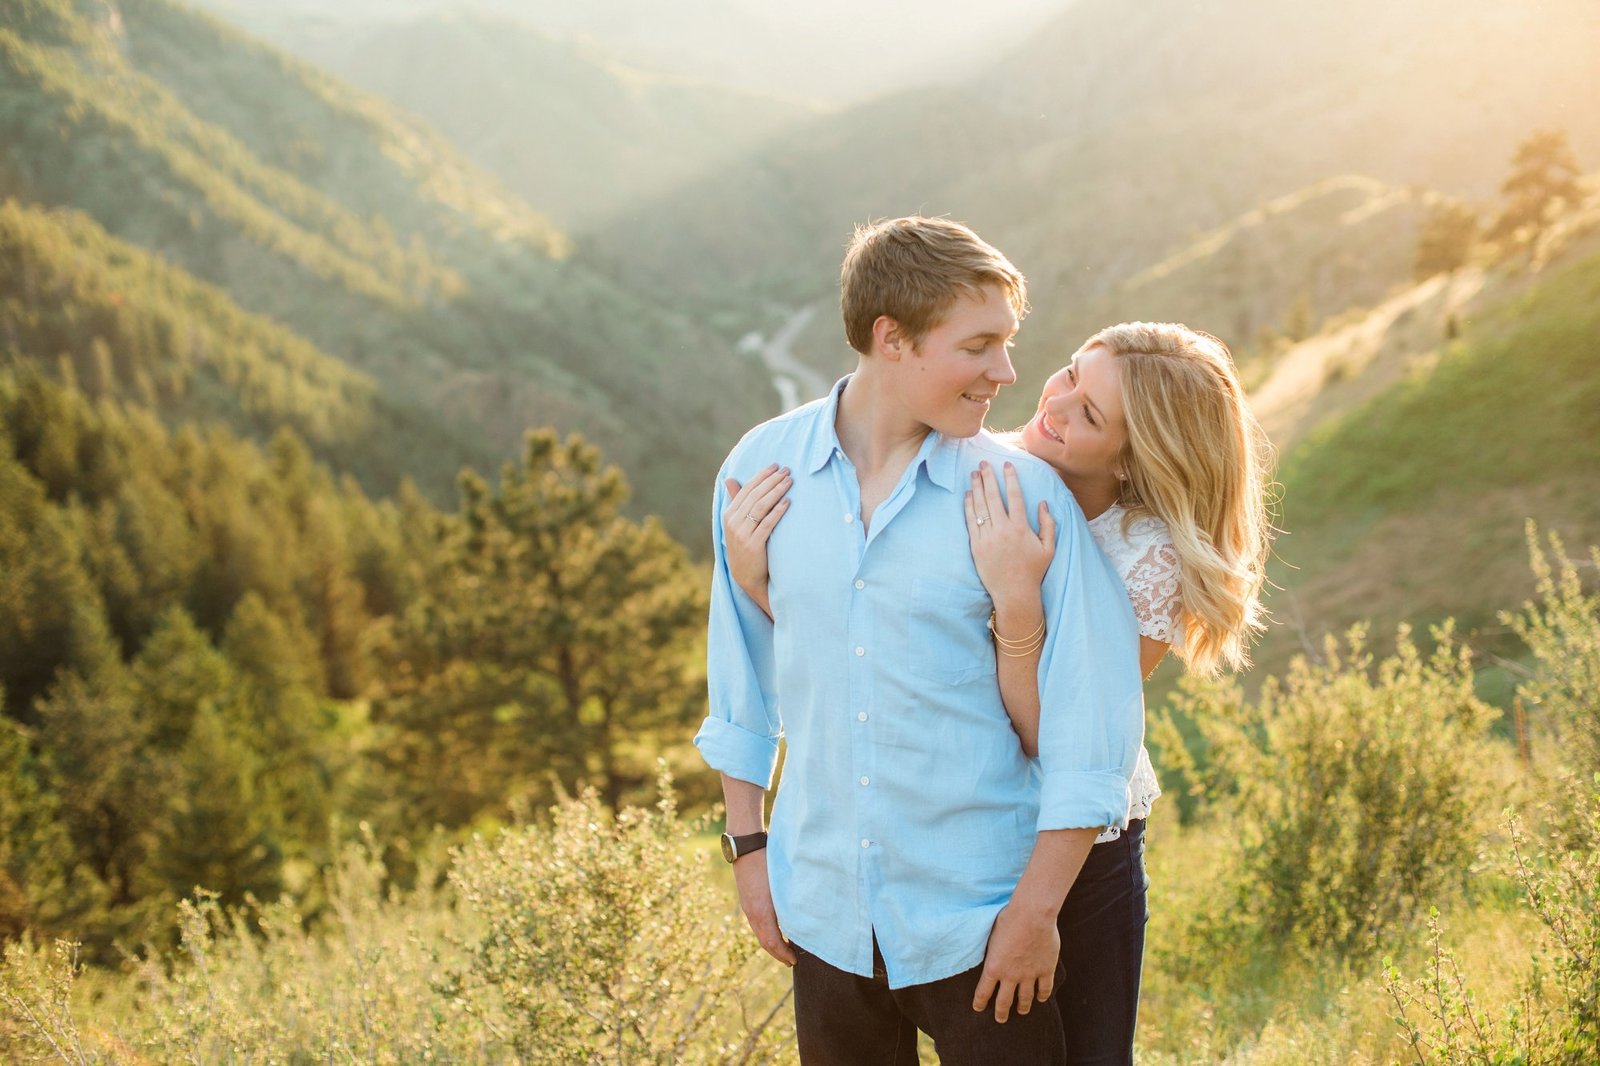 Engagements -Denver Lookout Mountain Engagement Session Golden Colorado Wedding Photographer Overlook City Lights Nature Outdoors Valley Light Couple (10)